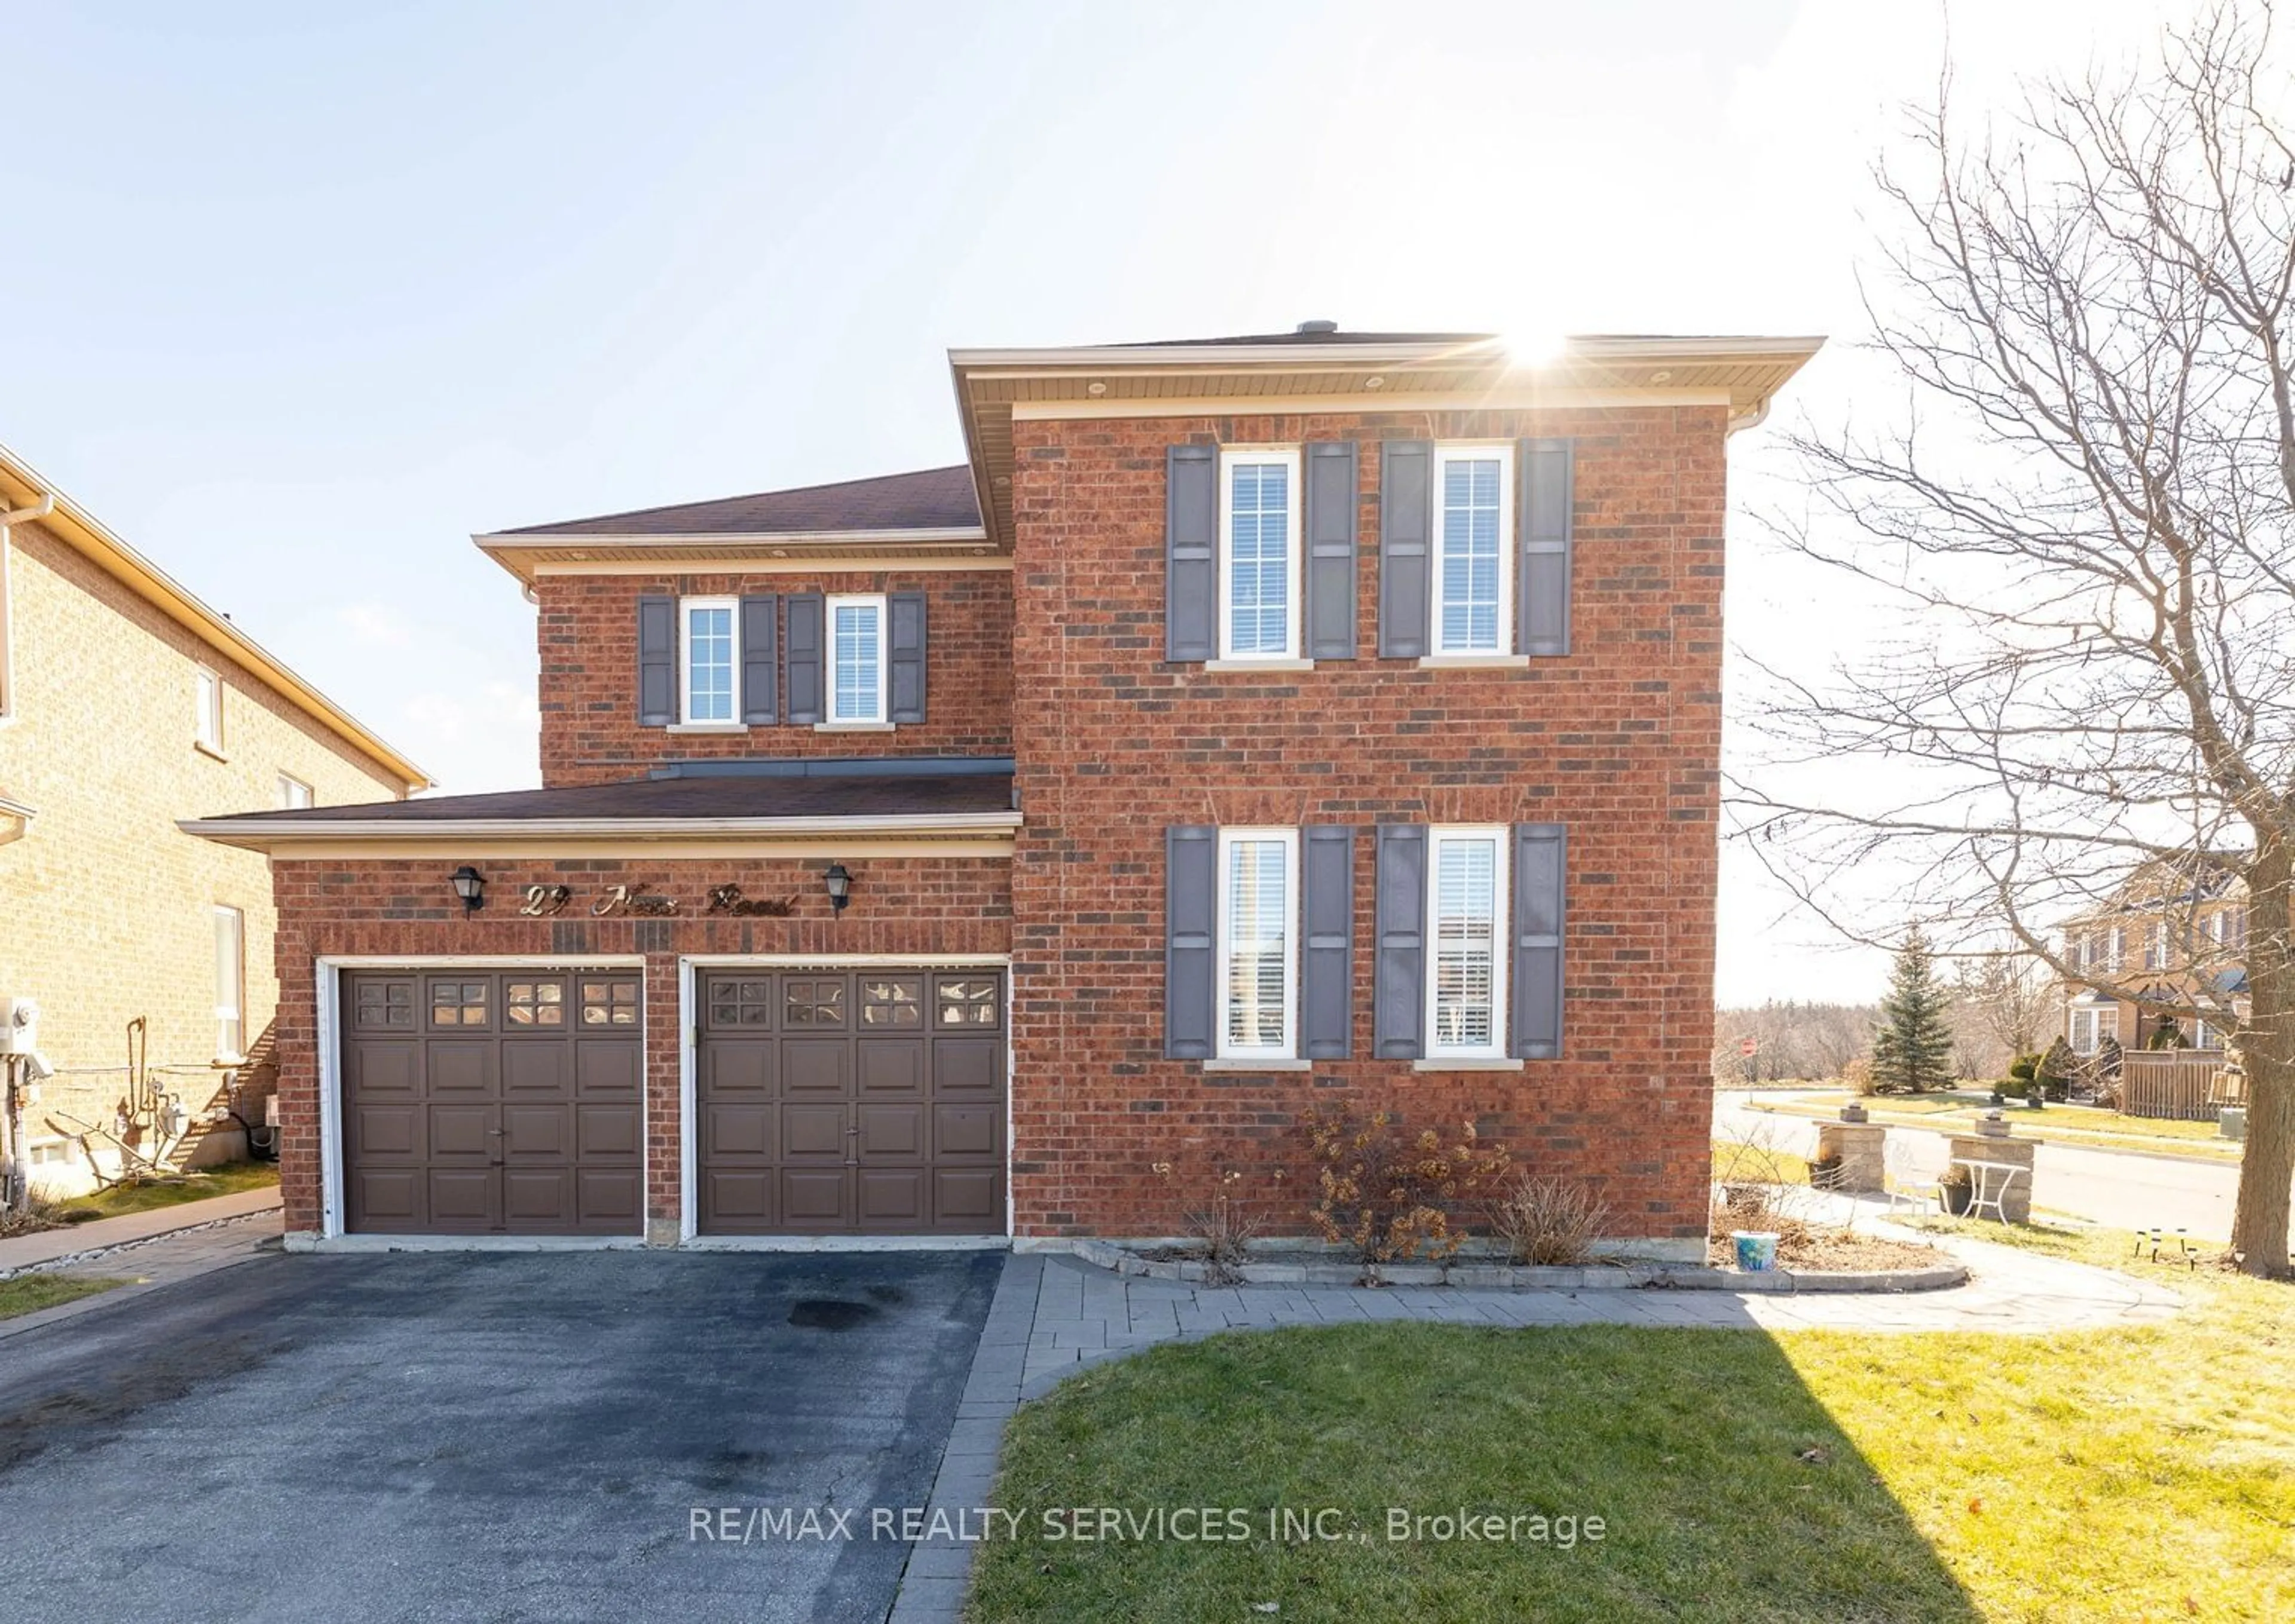 Home with brick exterior material for 29 Ness Rd, Brampton Ontario L6Y 5N9